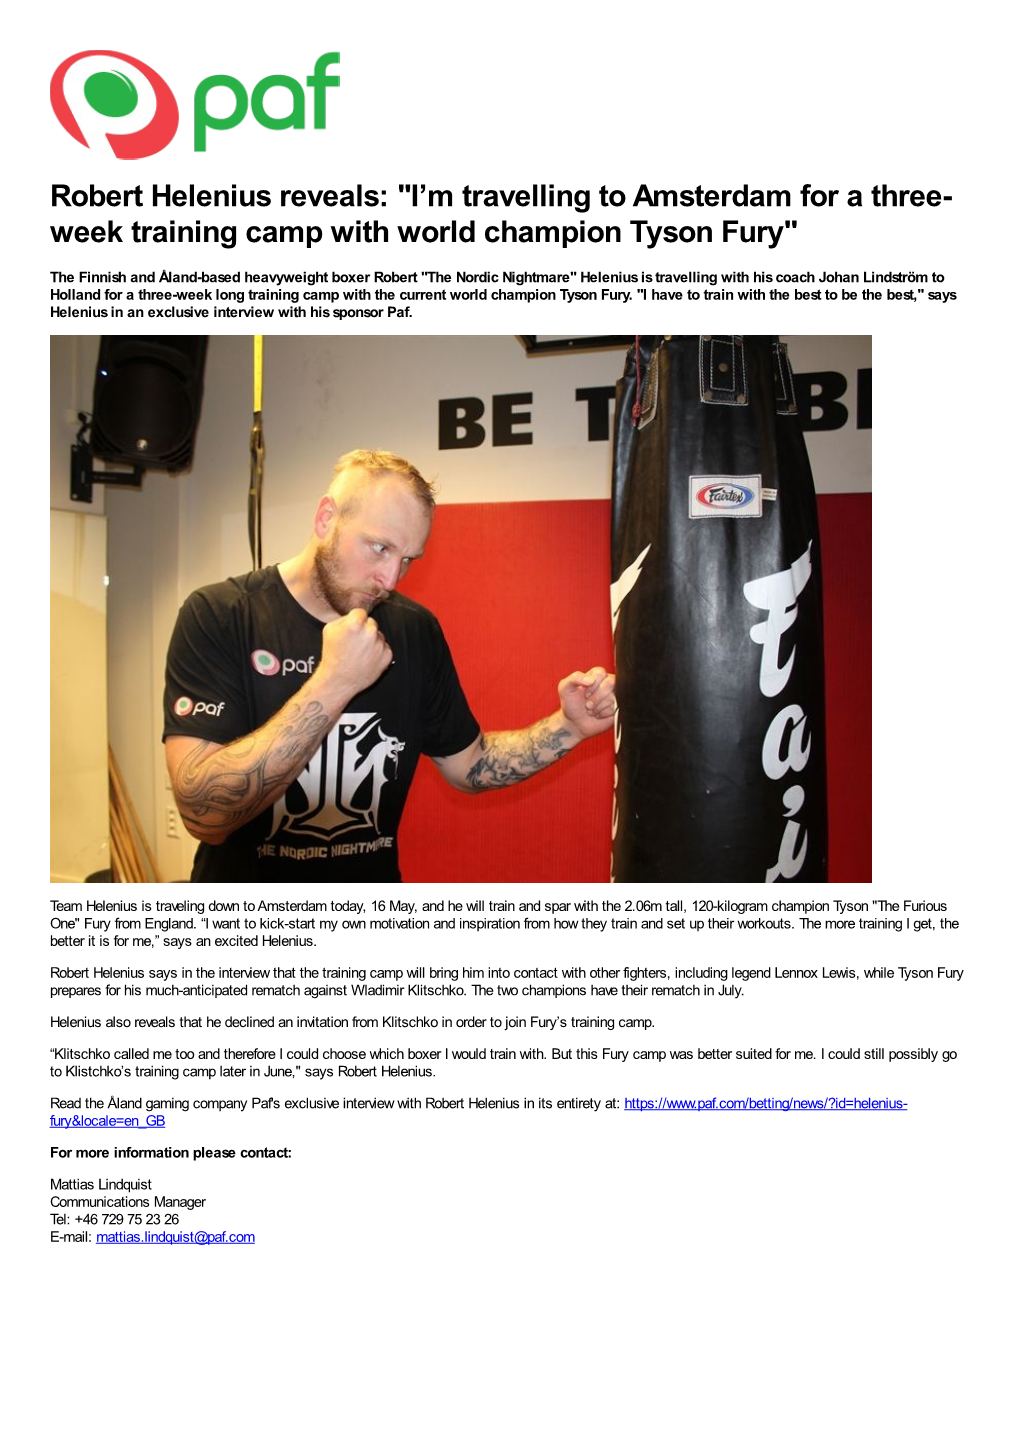 Robert Helenius Reveals: "I’M Travelling to Amsterdam for a Three- Week Training Camp with World Champion Tyson Fury"